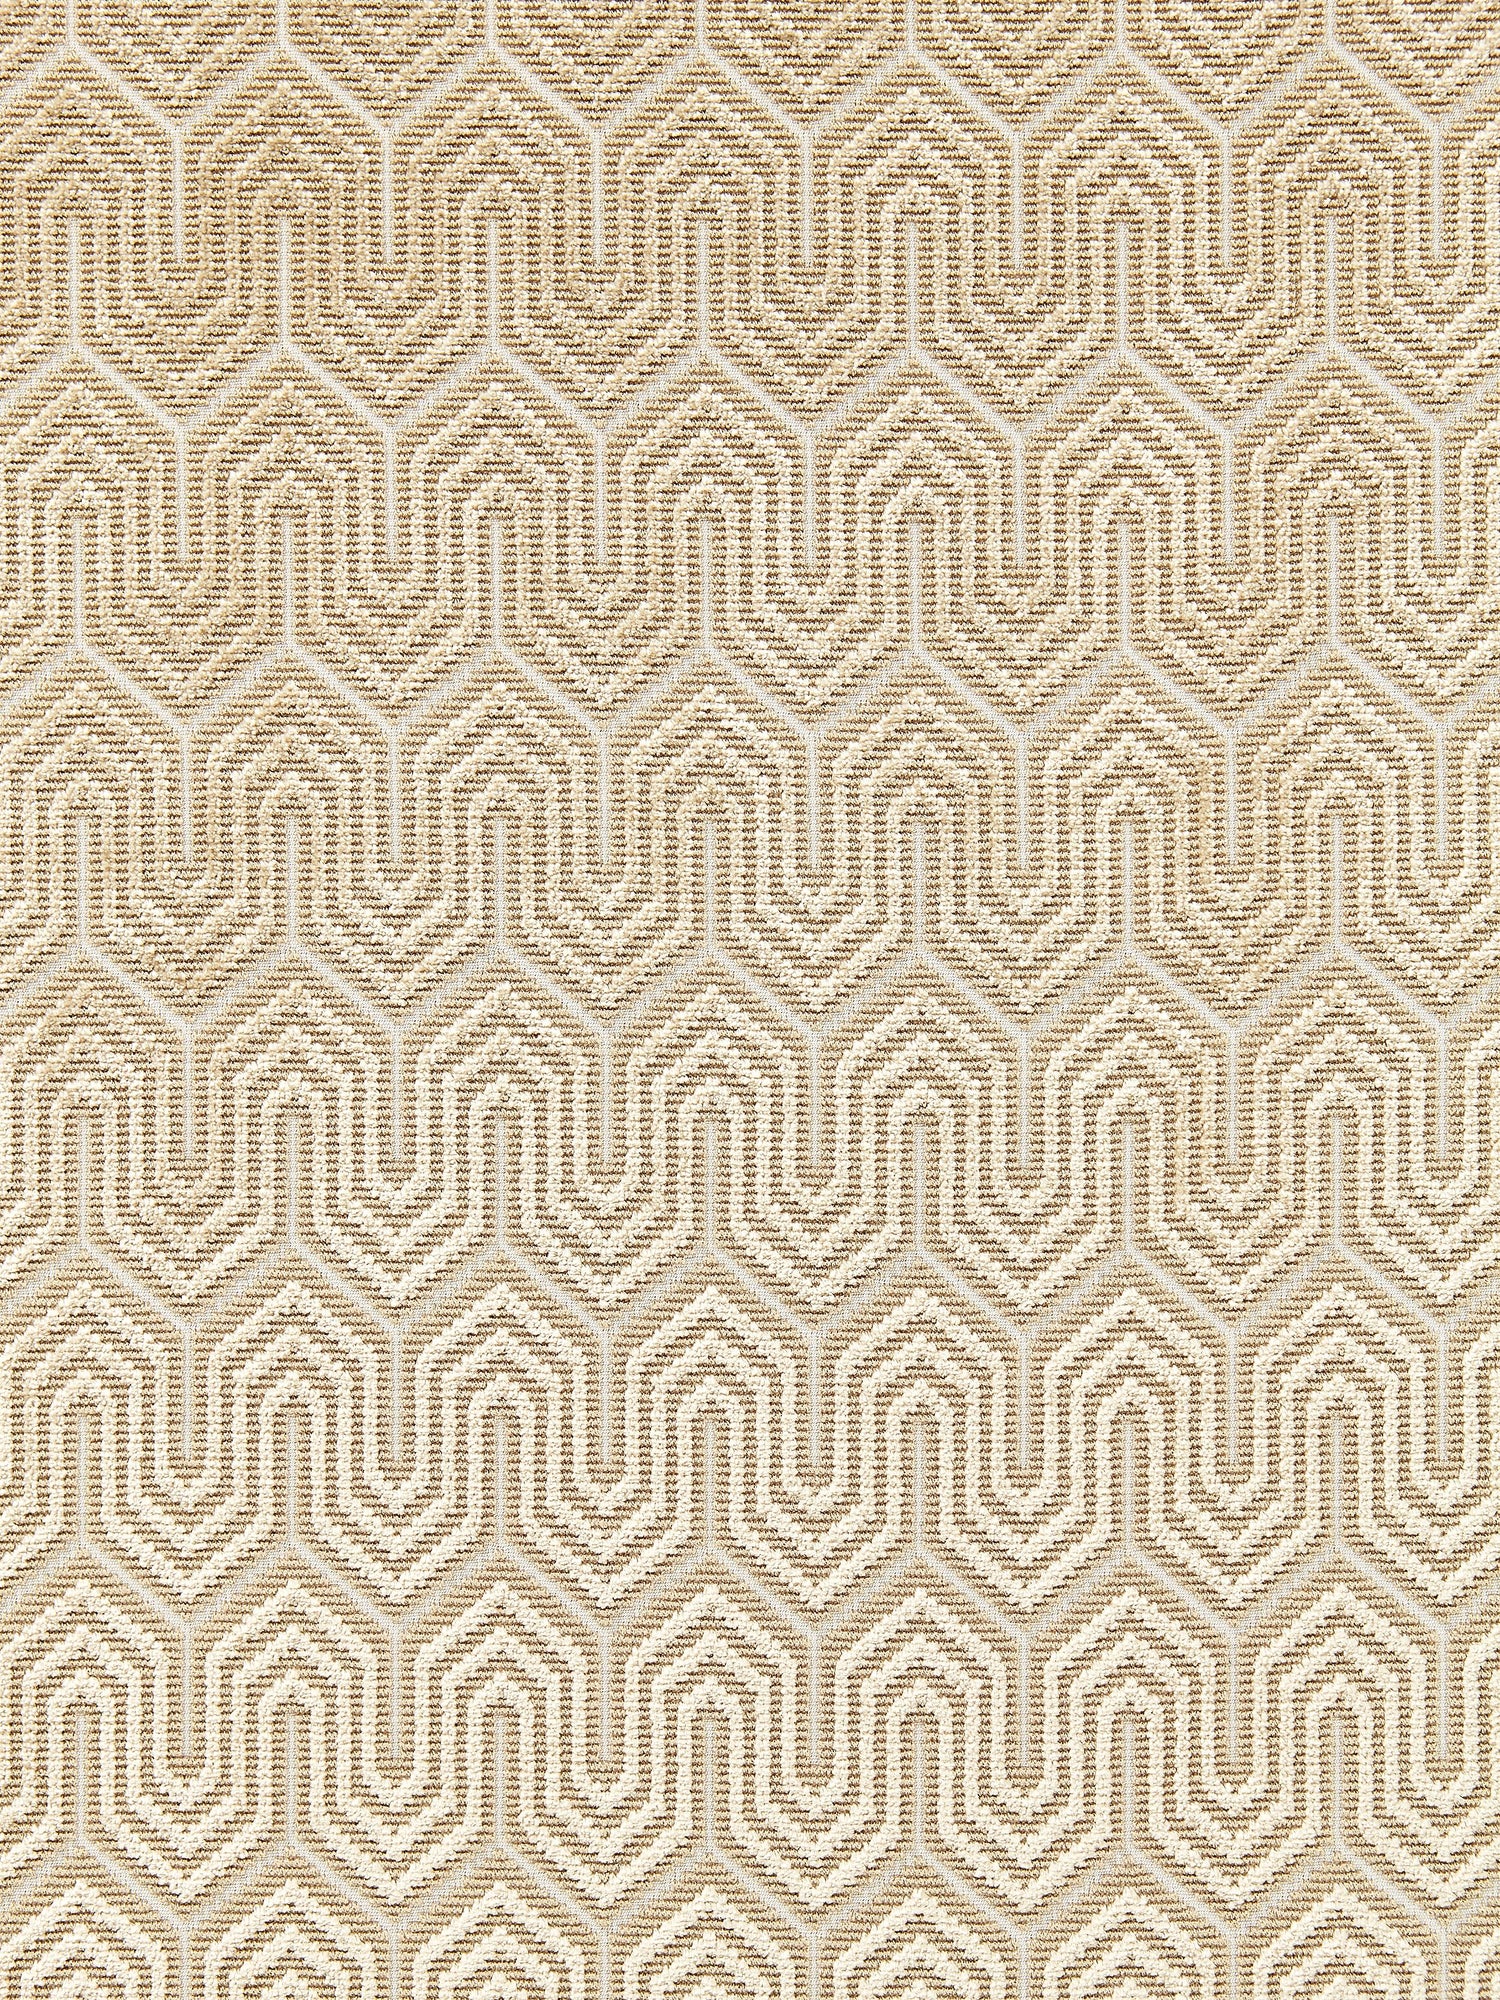 Undulation fabric in fawn color - pattern number SC 000127129 - by Scalamandre in the Scalamandre Fabrics Book 1 collection